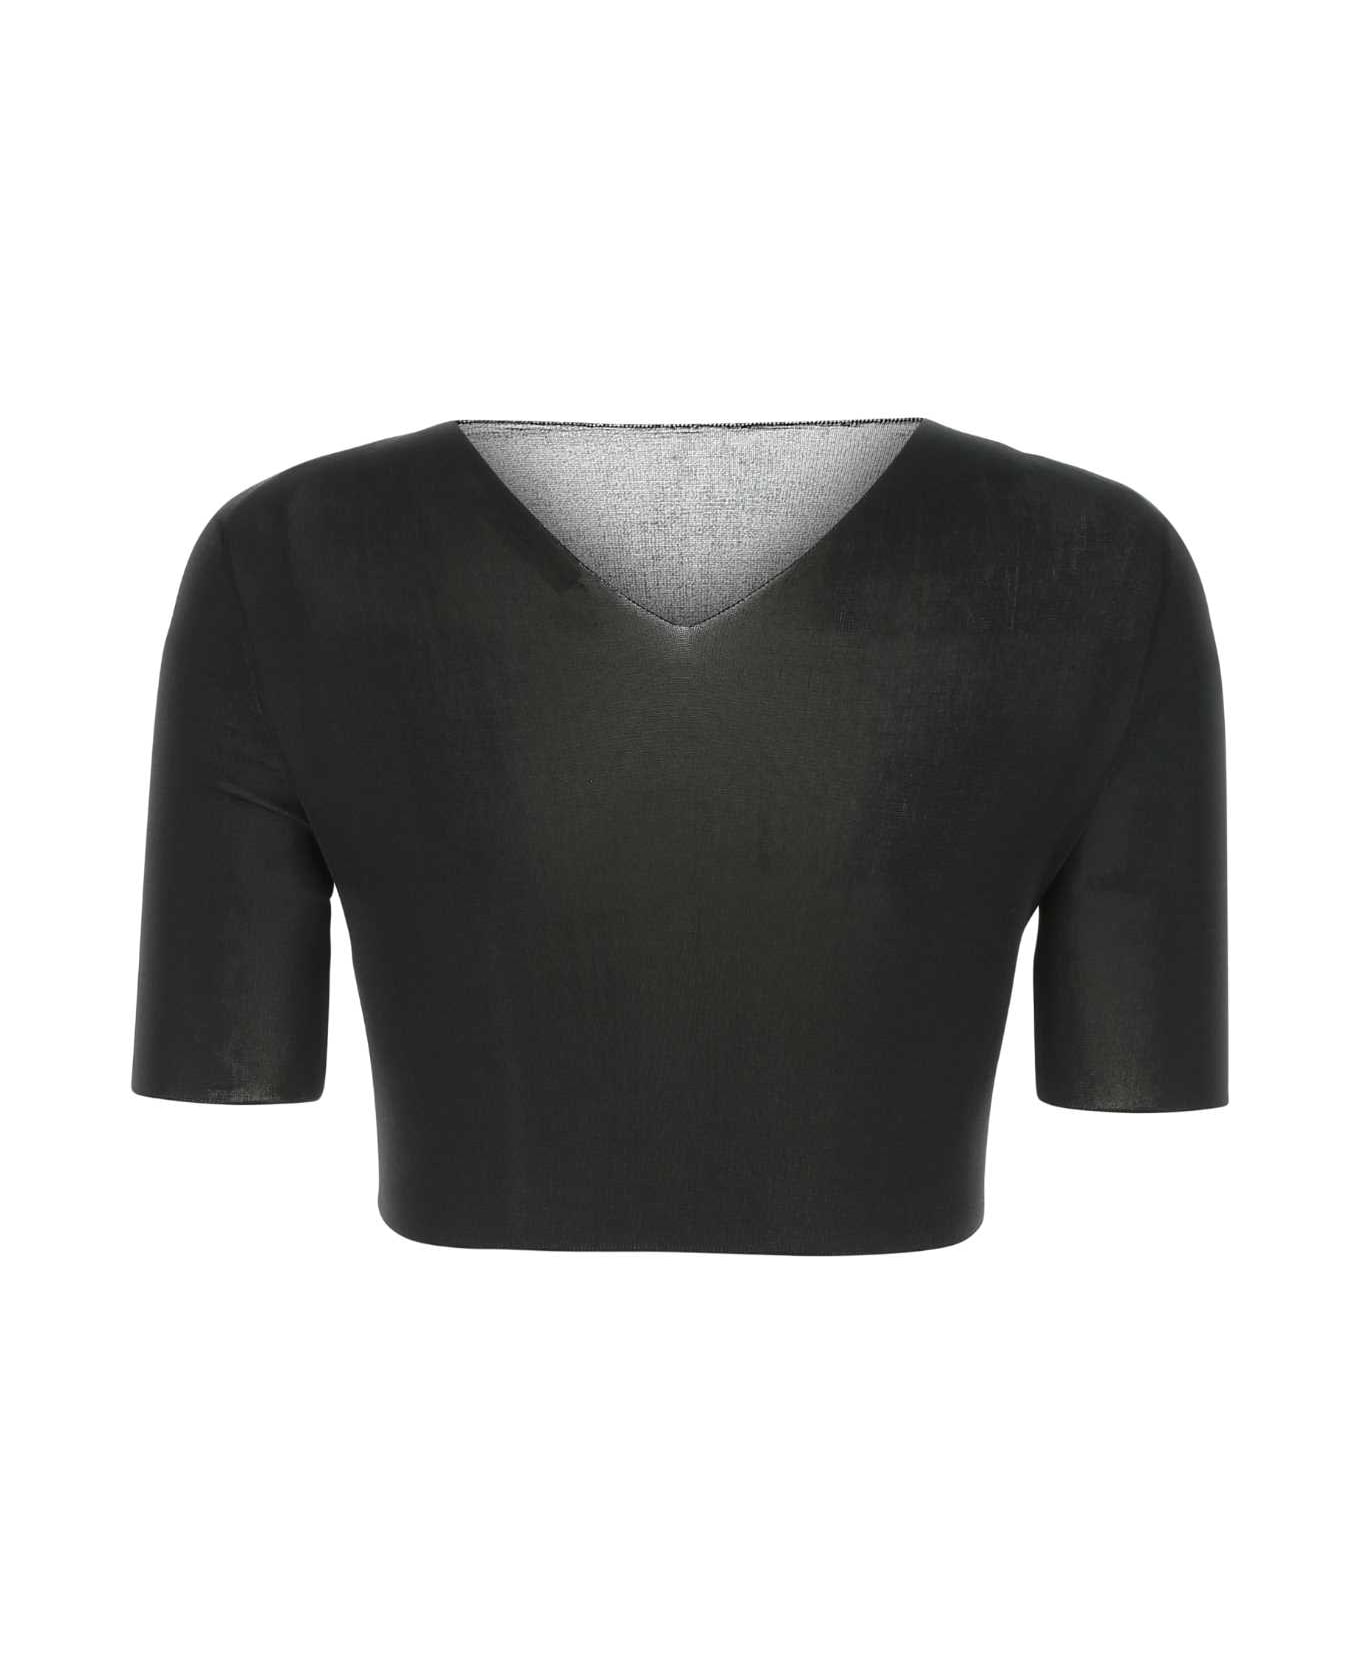 The Row Black Polyester Top - BLK